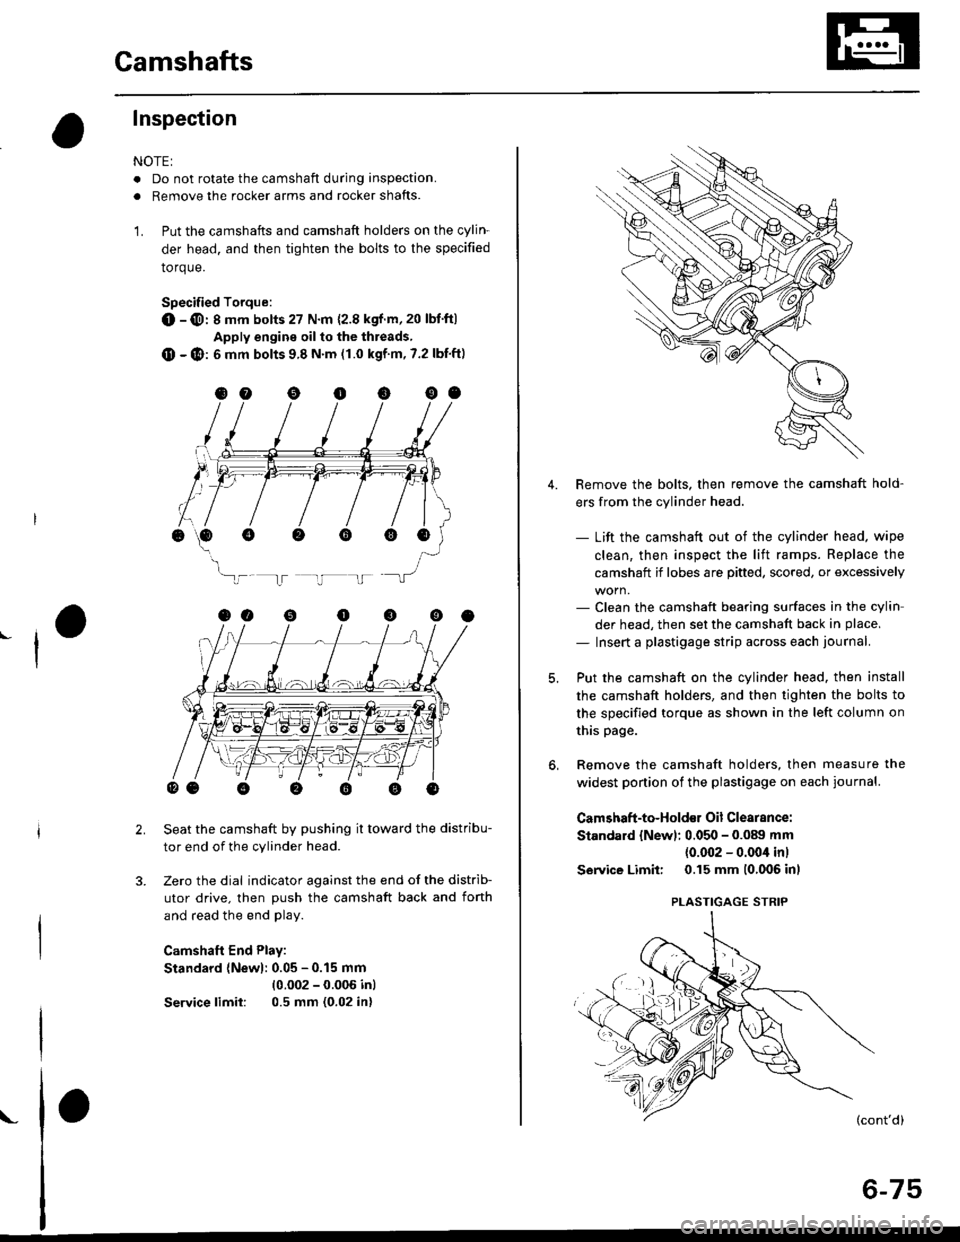 HONDA CIVIC 1999 6.G Service Manual Camshafts
Inspection
NOTE:
. Do not rotate the camshaft during inspection.
. Removg the rocker arms and rocker shafts.
L Put the camshafts and camshaft holders on the cylin-
der head. and then tighte